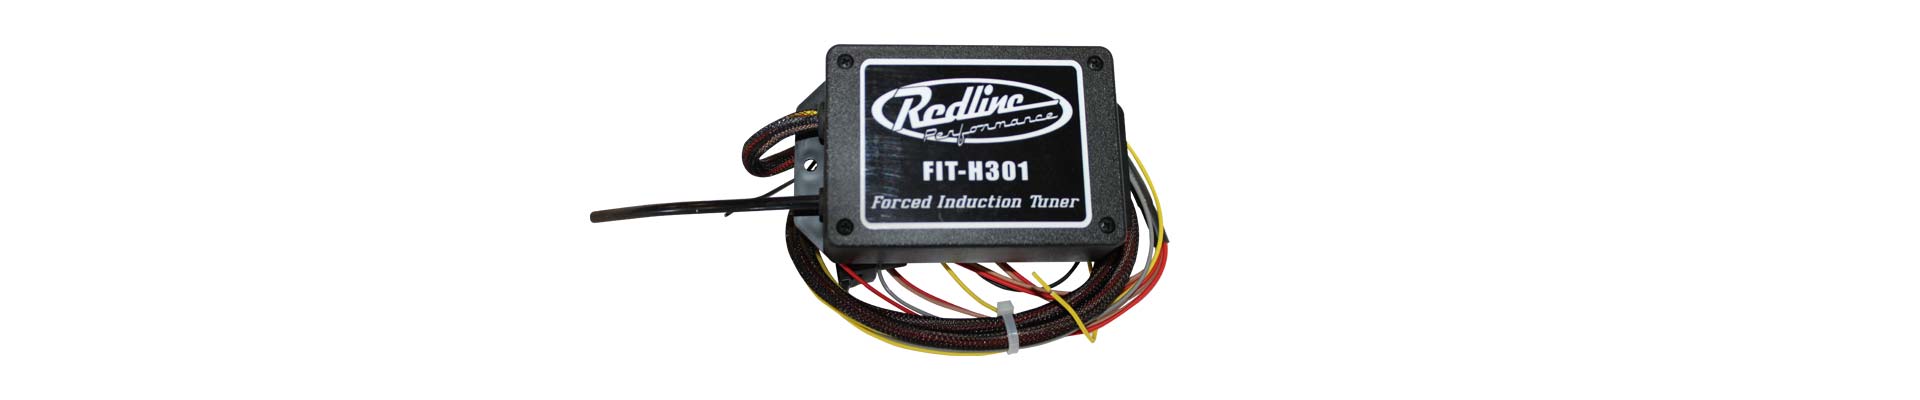 view redline Fuel-Systems